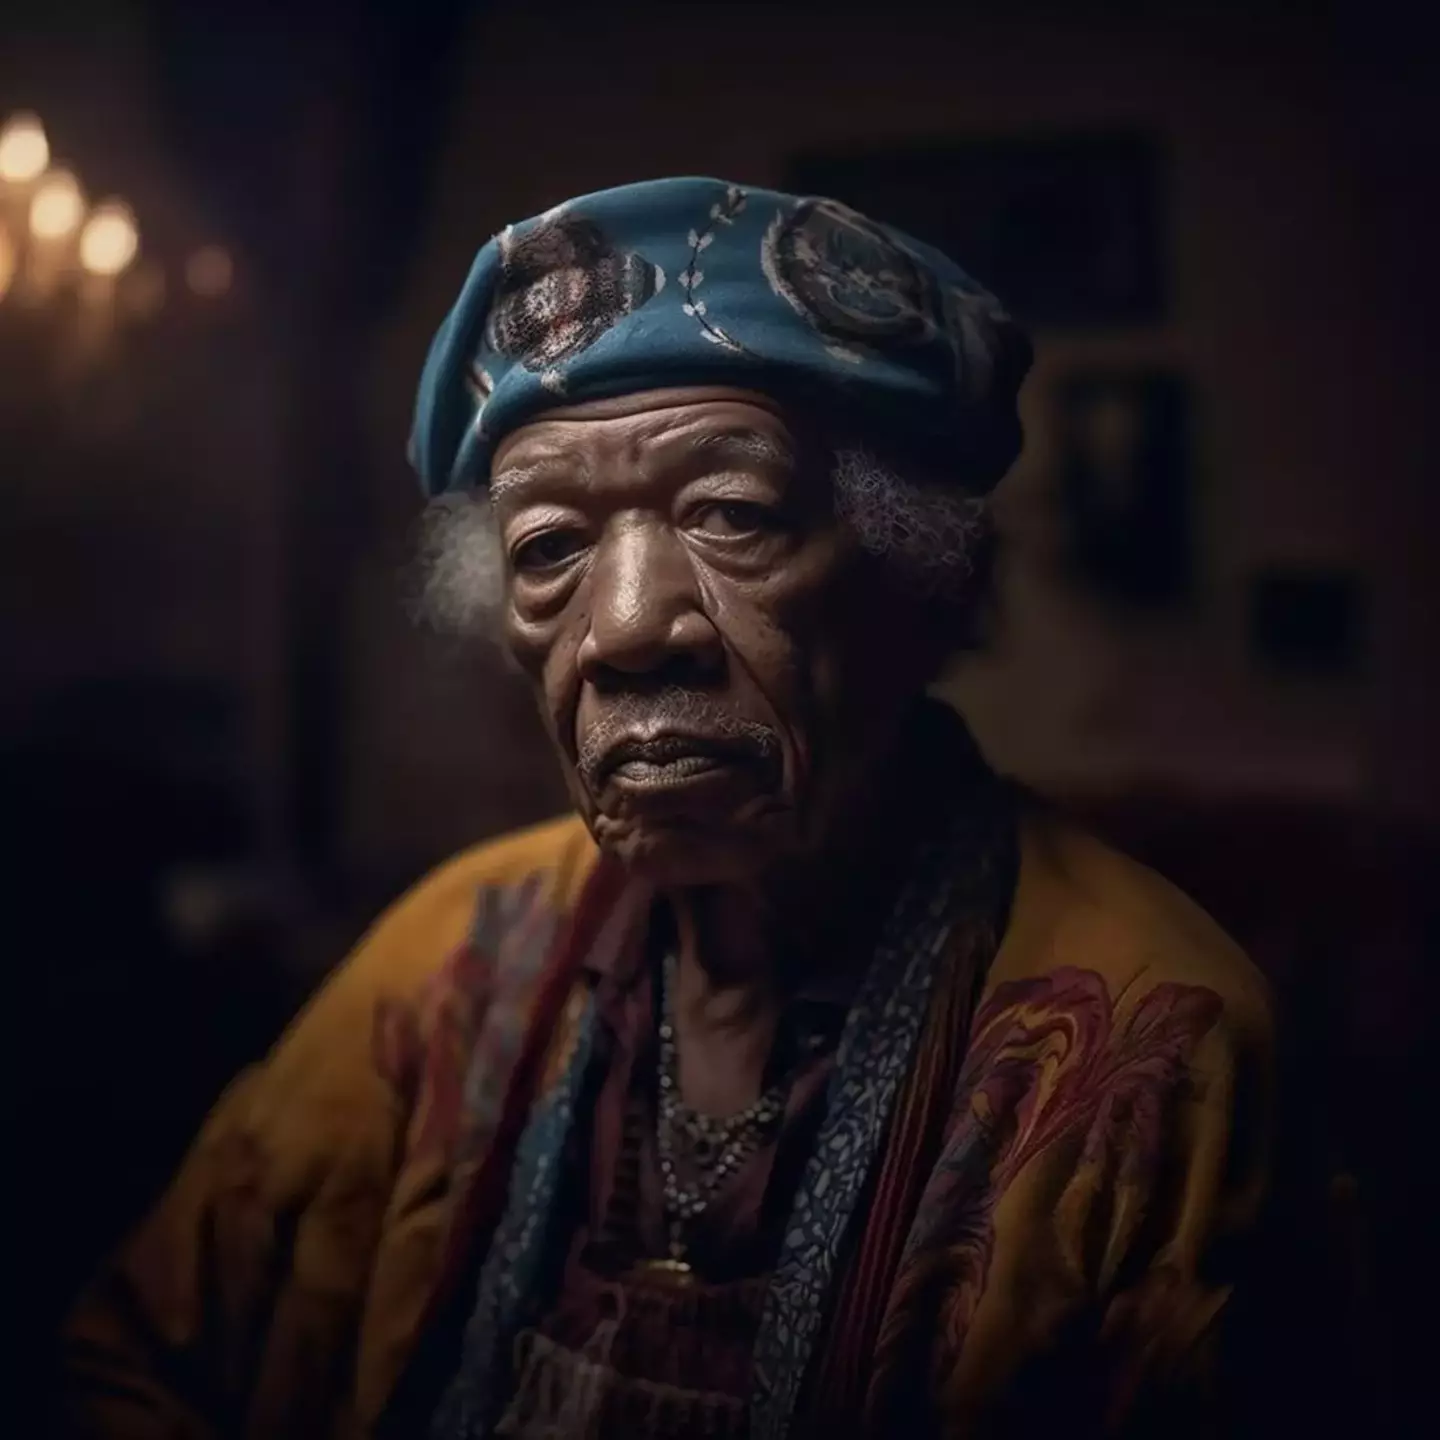 Jimi Hendrix if he were alive today according to AI.